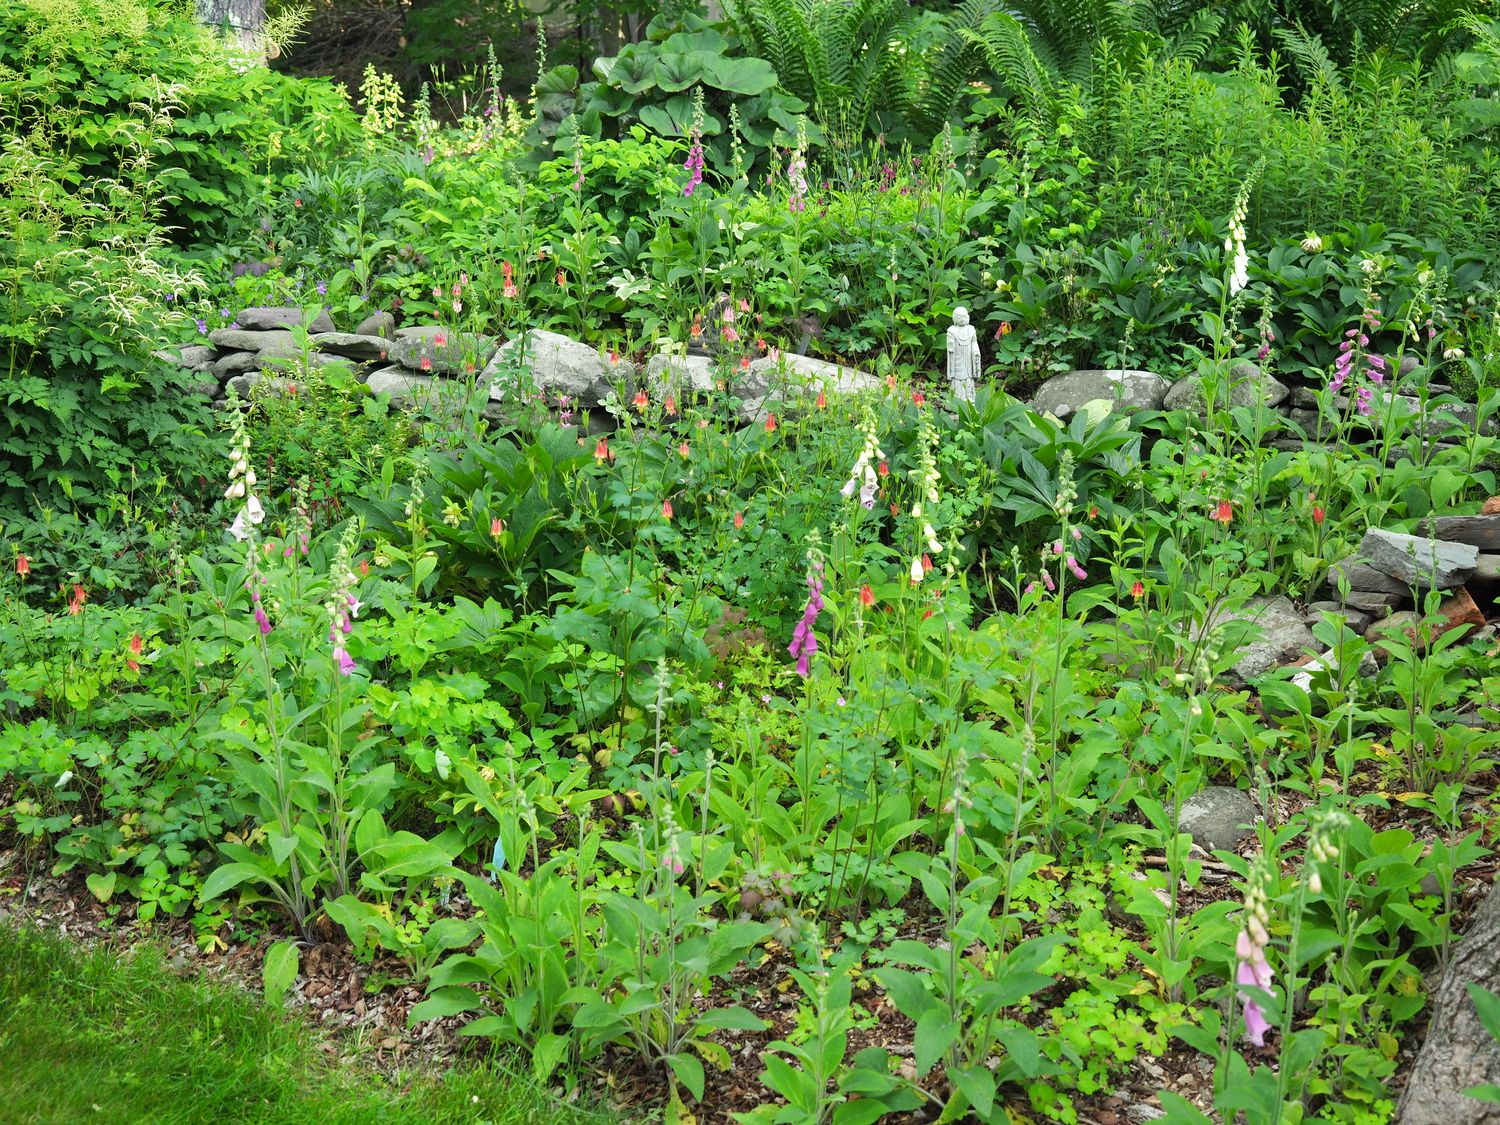 This is an area where primulas provide early color and they are then replaced by the columbines. In this area, A. canadensis, our native columbine, dominates (yellow and red flowers). As these fade, the columbines are replace by the self-seeding Digitalis in white, strawberry and pink. Way in the back on the upper level to the left is the yellow blooming Digitalis ambigua, and on the far right is Aruncus (goat's beard) with a dwarf Aruncus below it. ANDREW MESSINGER